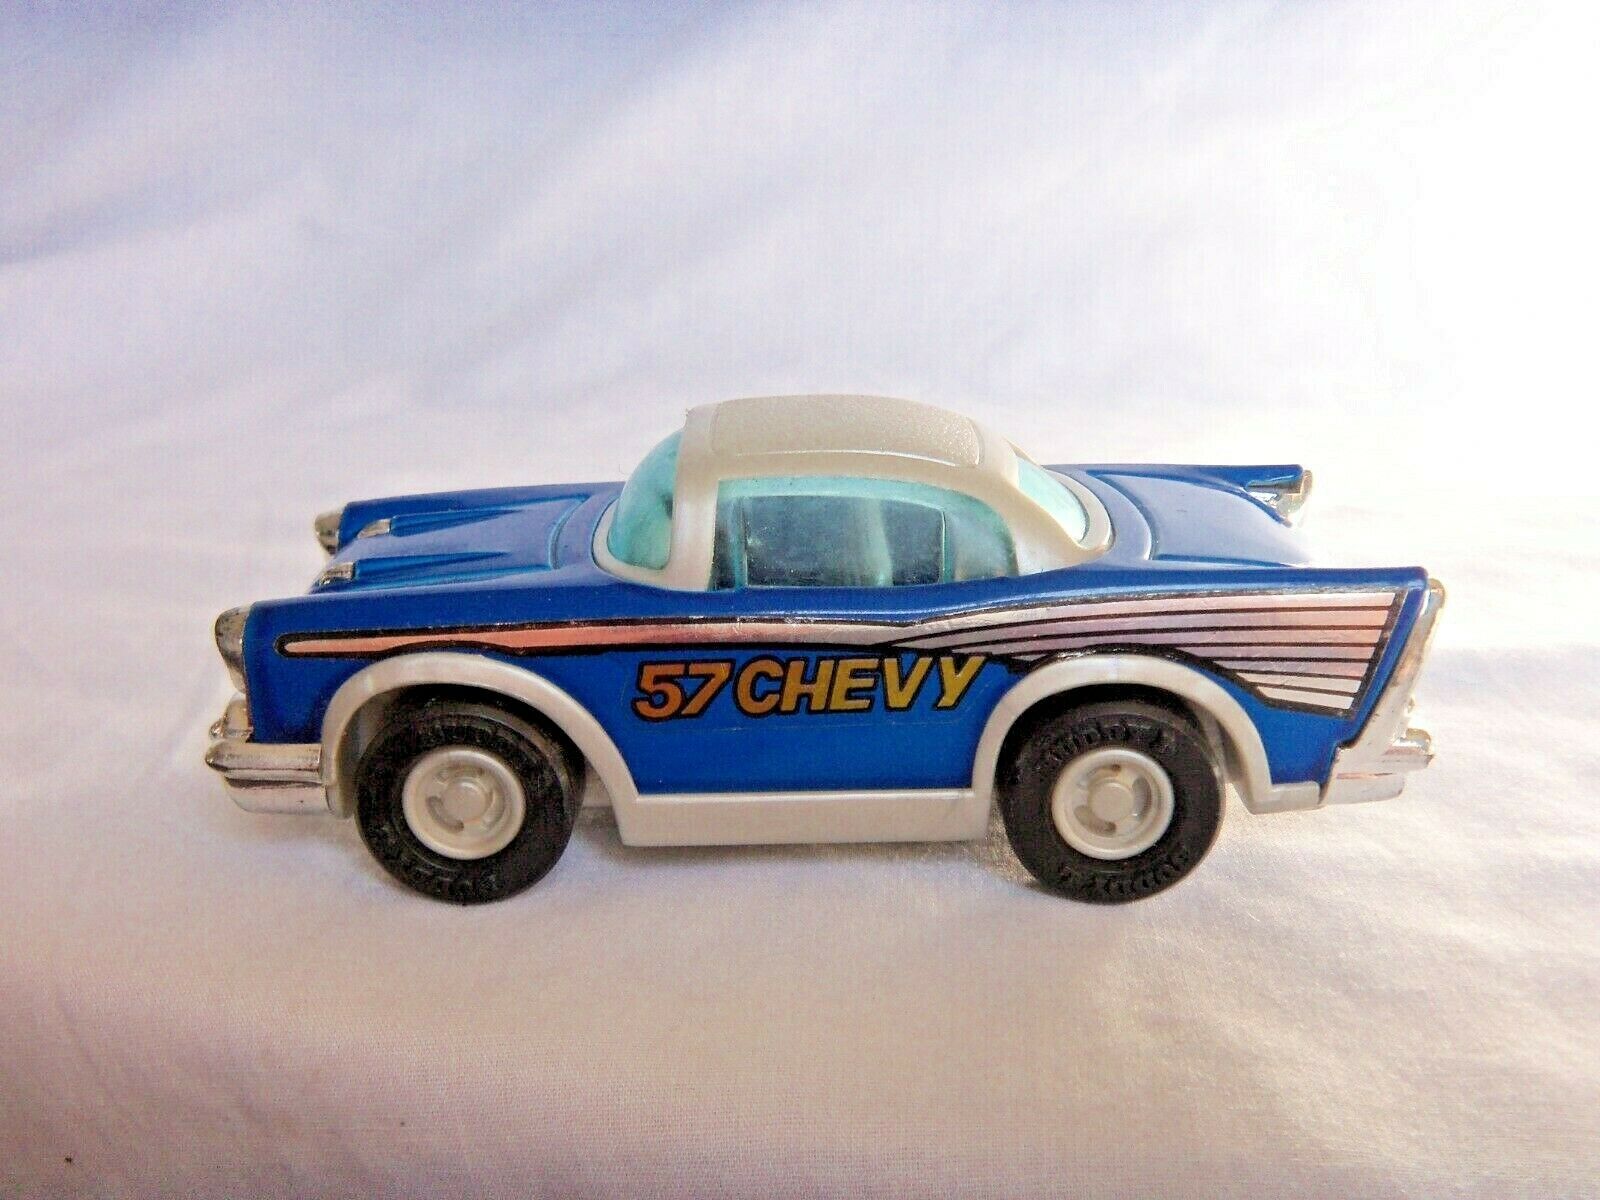 VINTAGE BUDDY L PLASTIC HOTROD CAR  57 CHEVY    MADE IN JAPAN  - $14.80